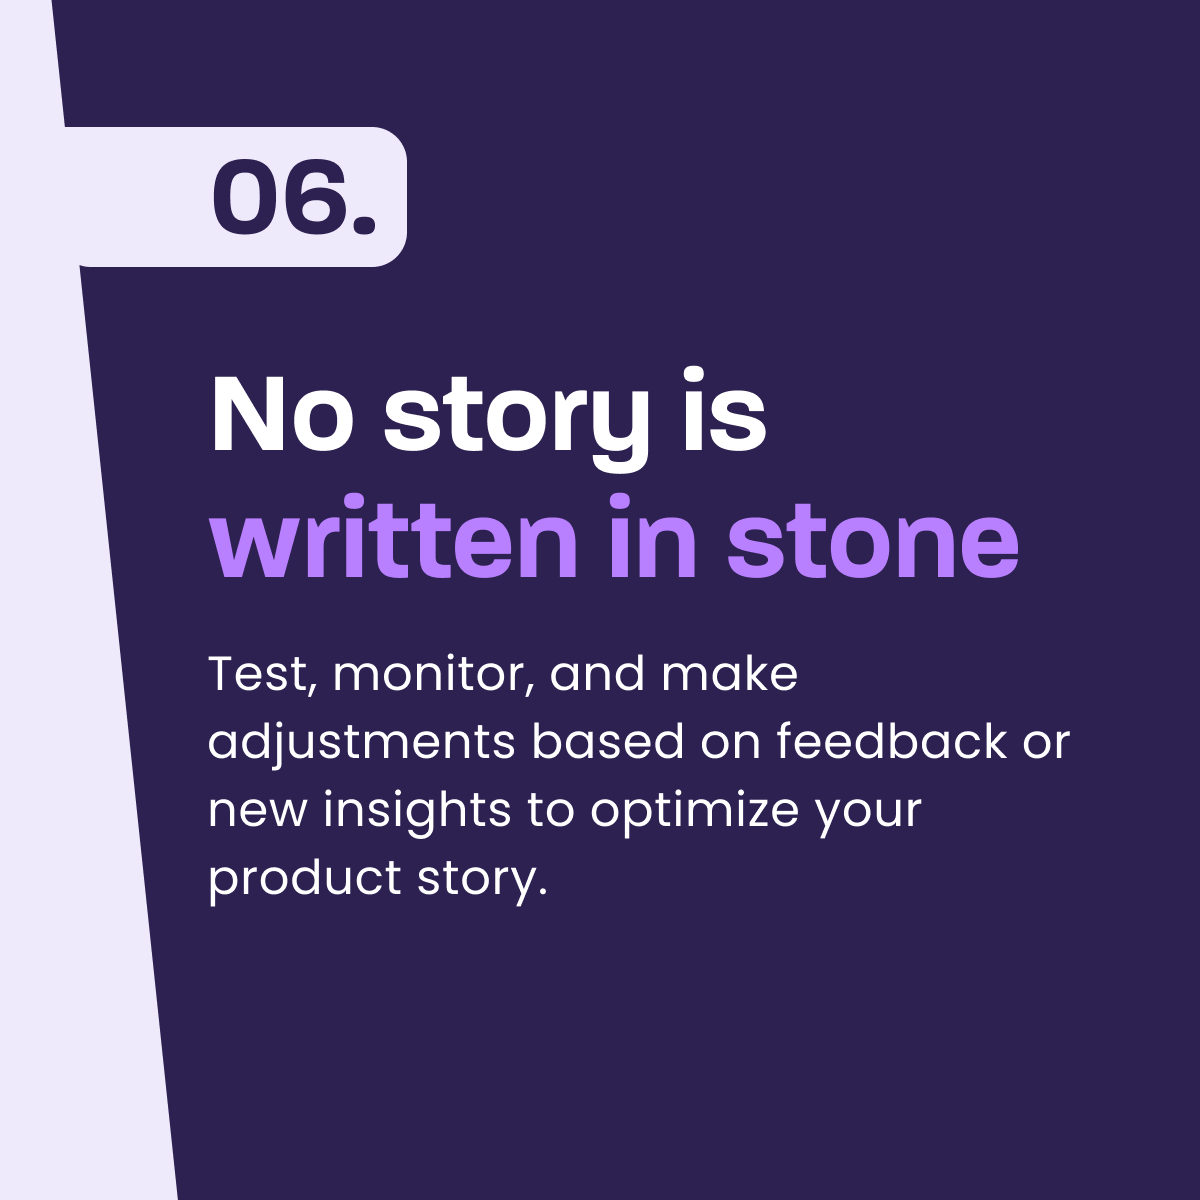 Test, monitor, and adjust your product story